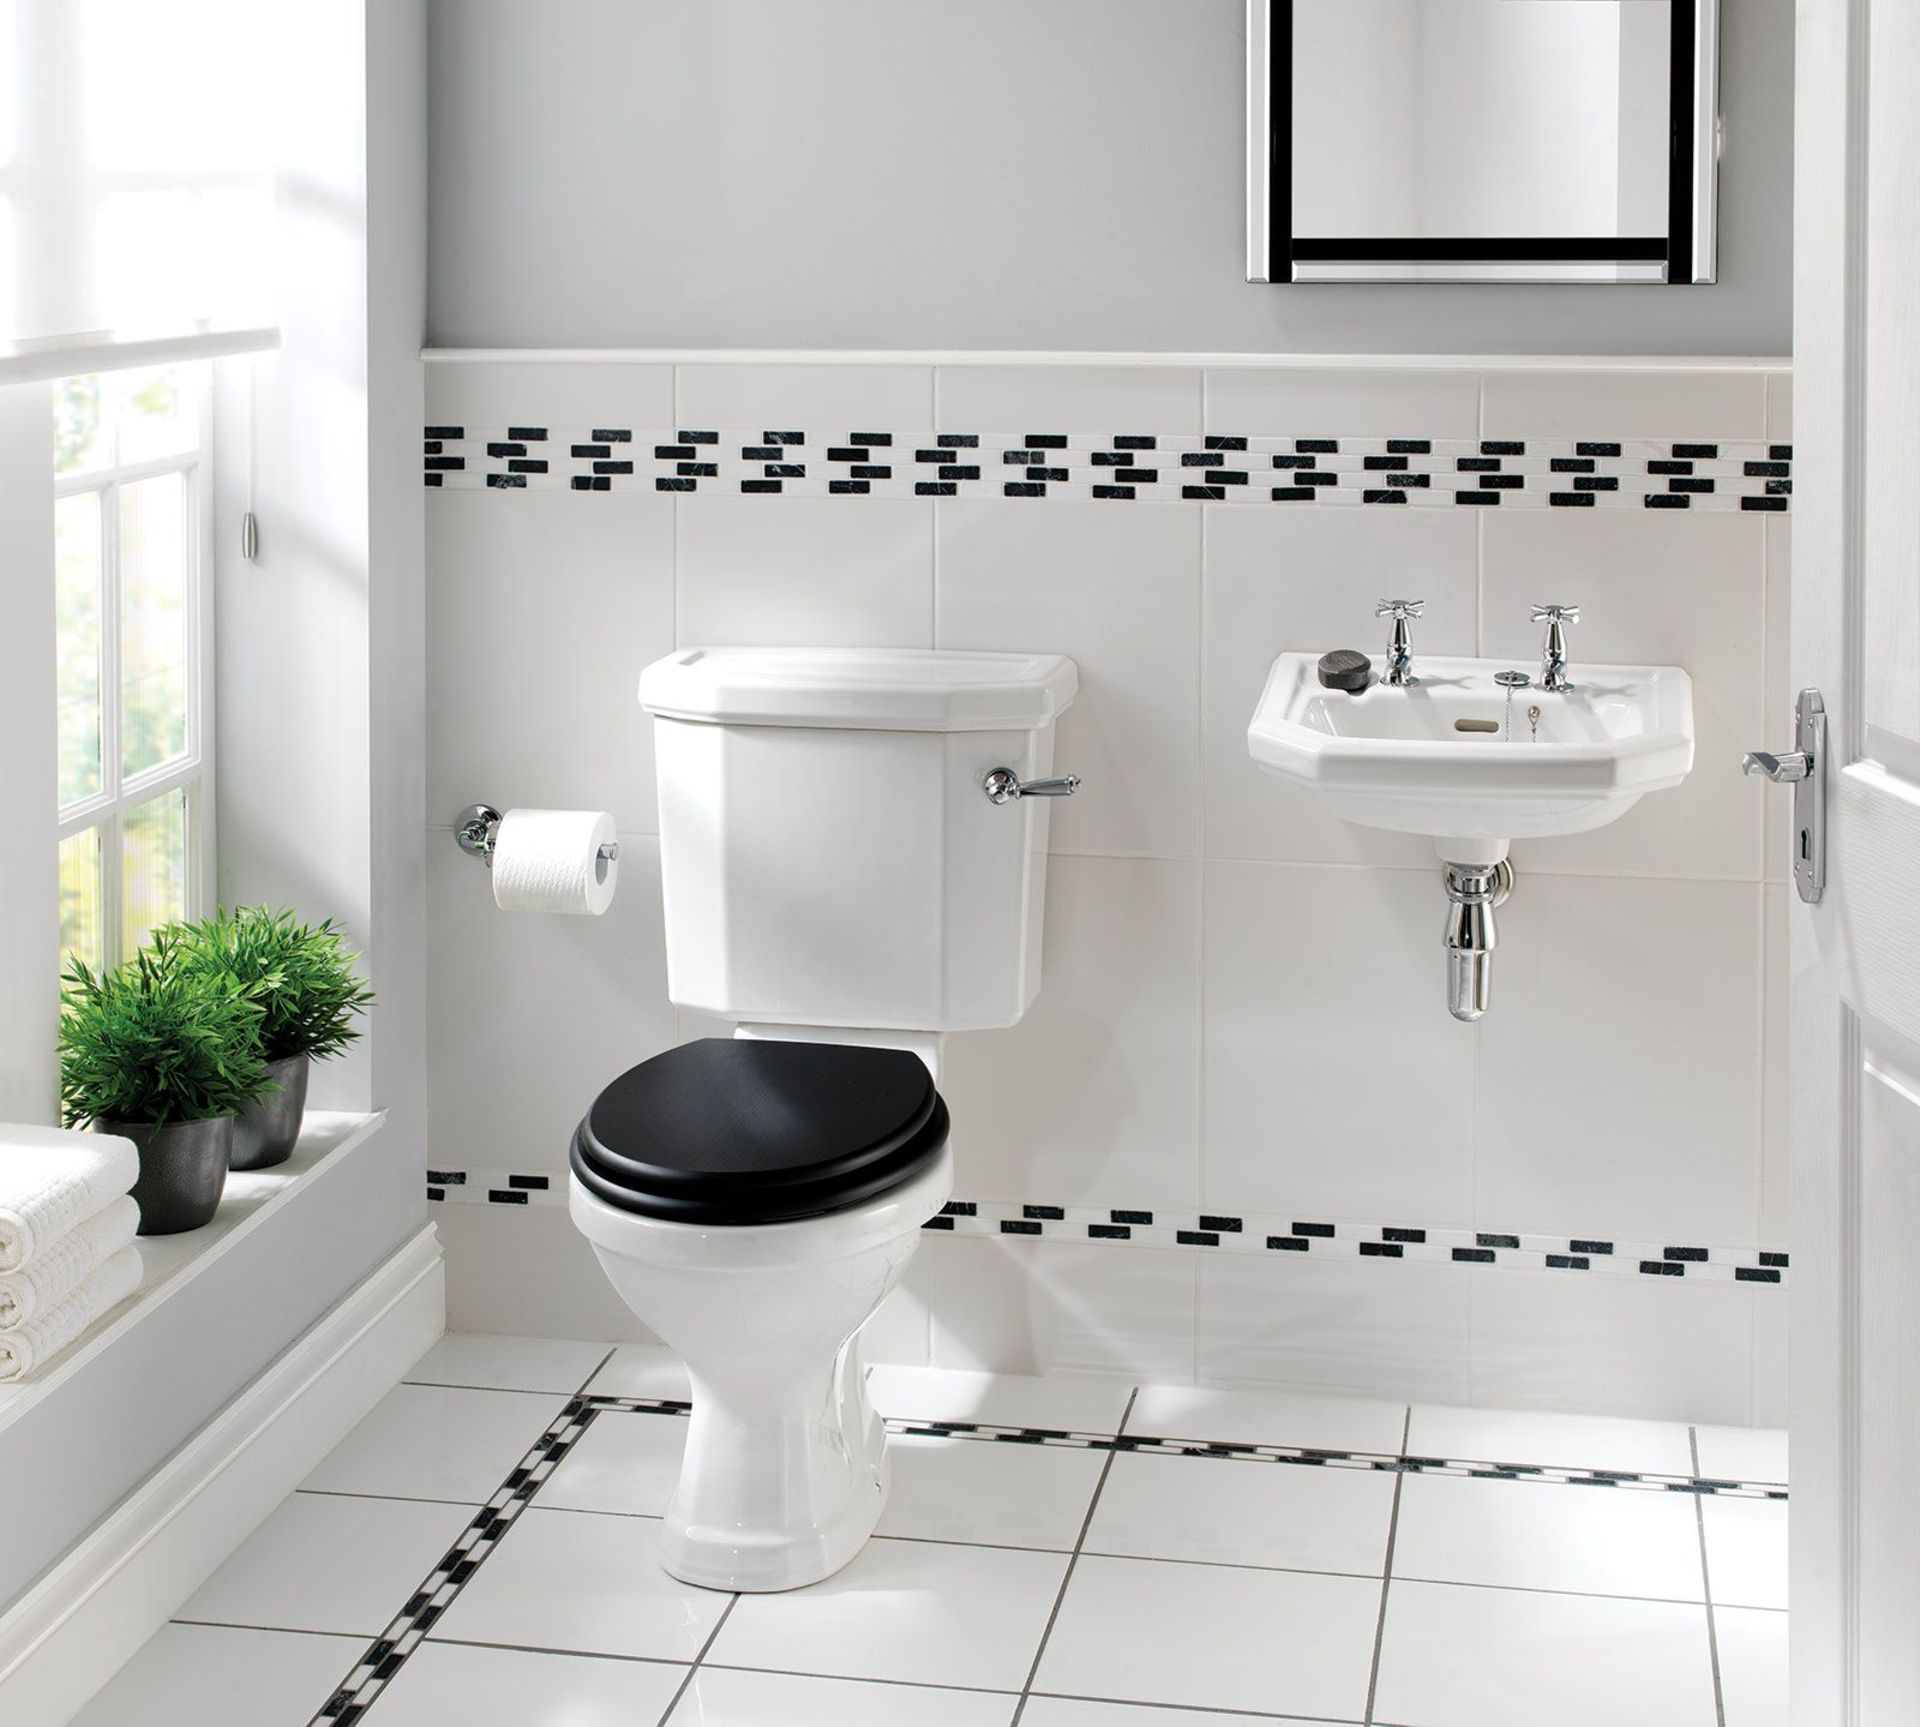 Twyford Clarice Close Coupled Toilet Set. Product Code: Cl1148Wh The Clarice Close Coupled WC...